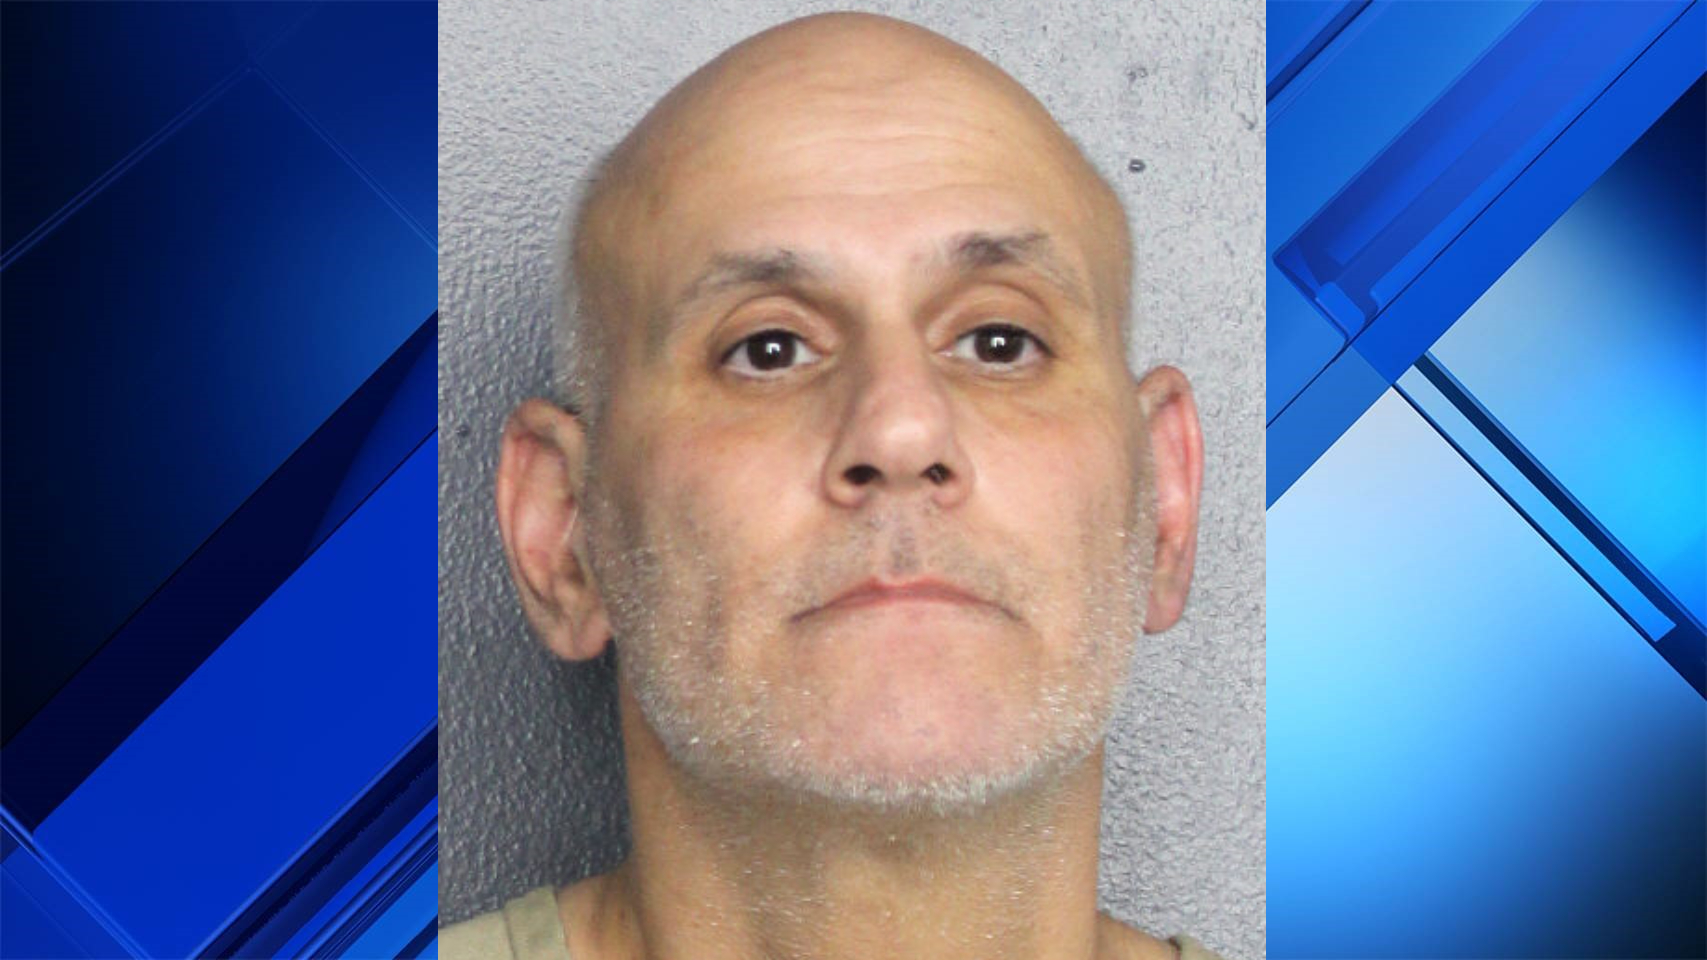 Davie man accused of sharing child sex abuse videos pic pic